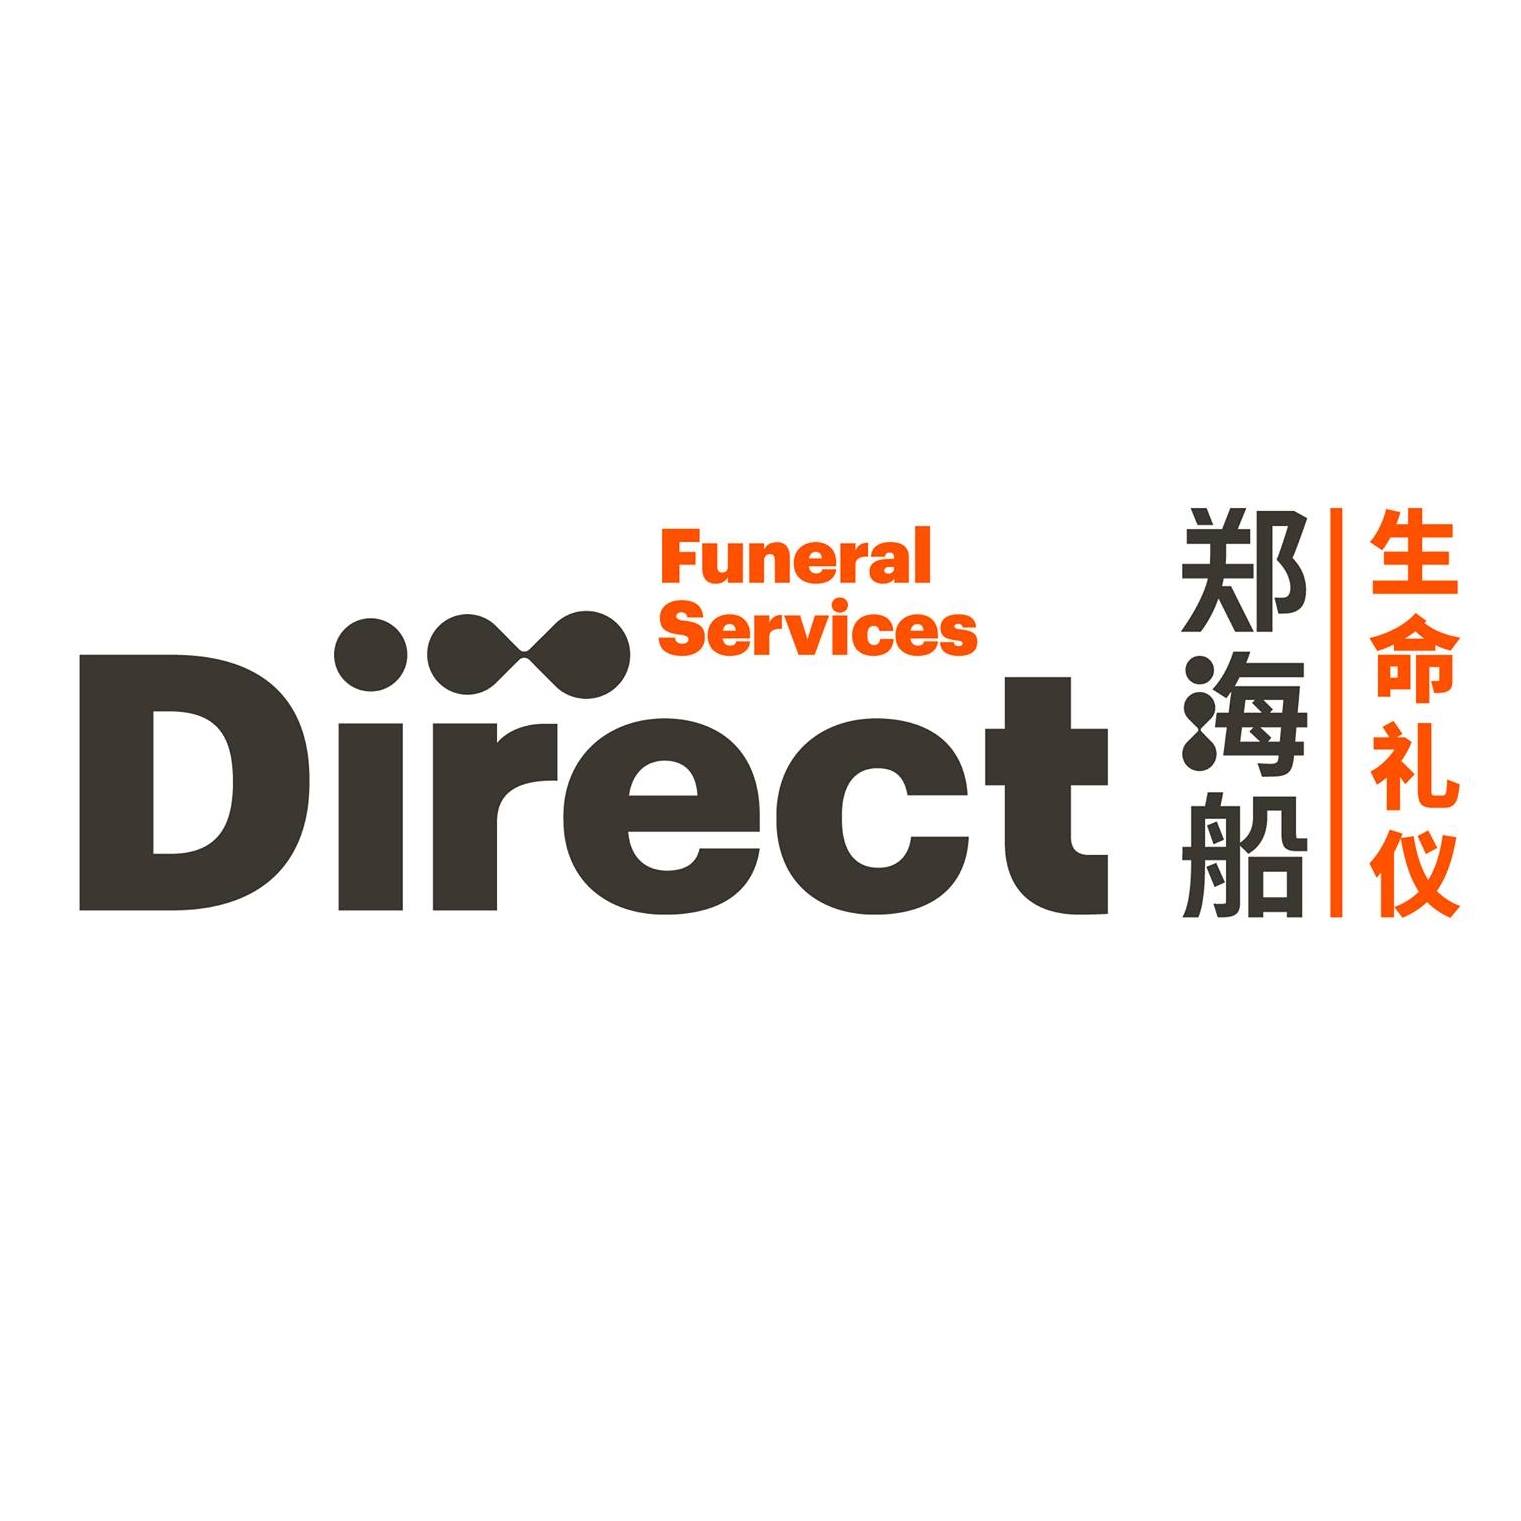 Direct Funeral Services